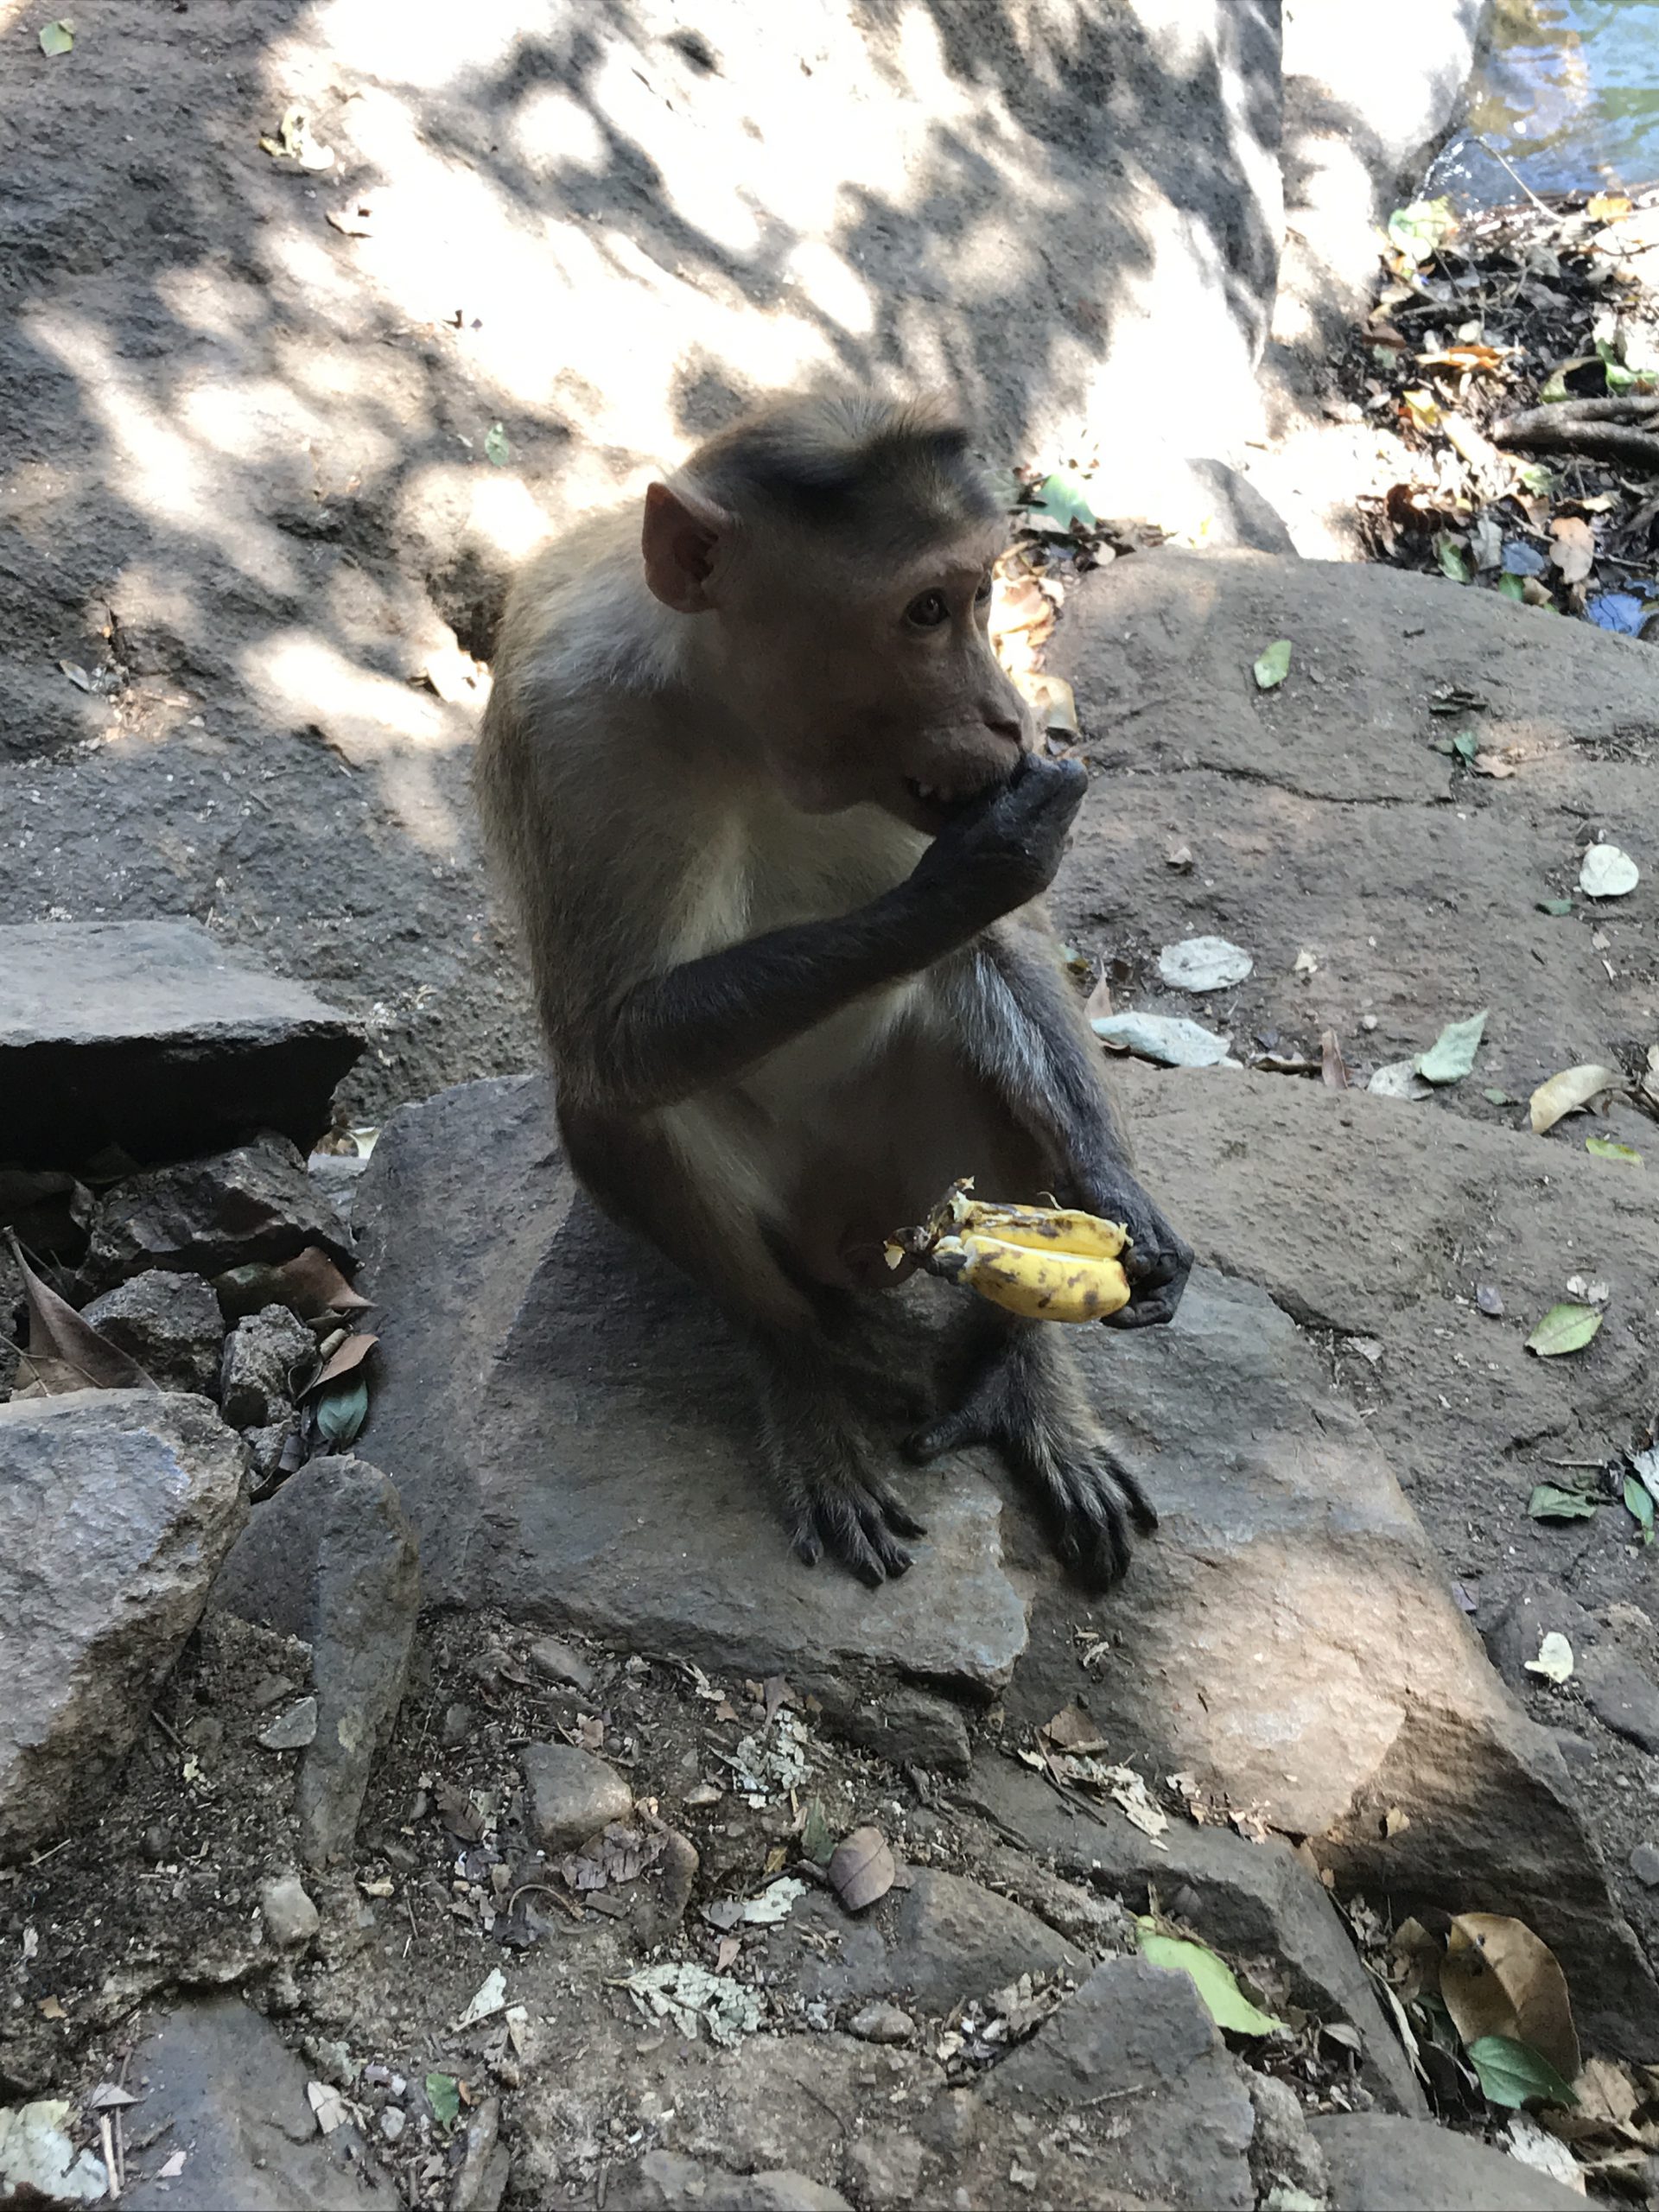 monkey eating bananas in the jungle of goa in india near the Dudhsagar Falls